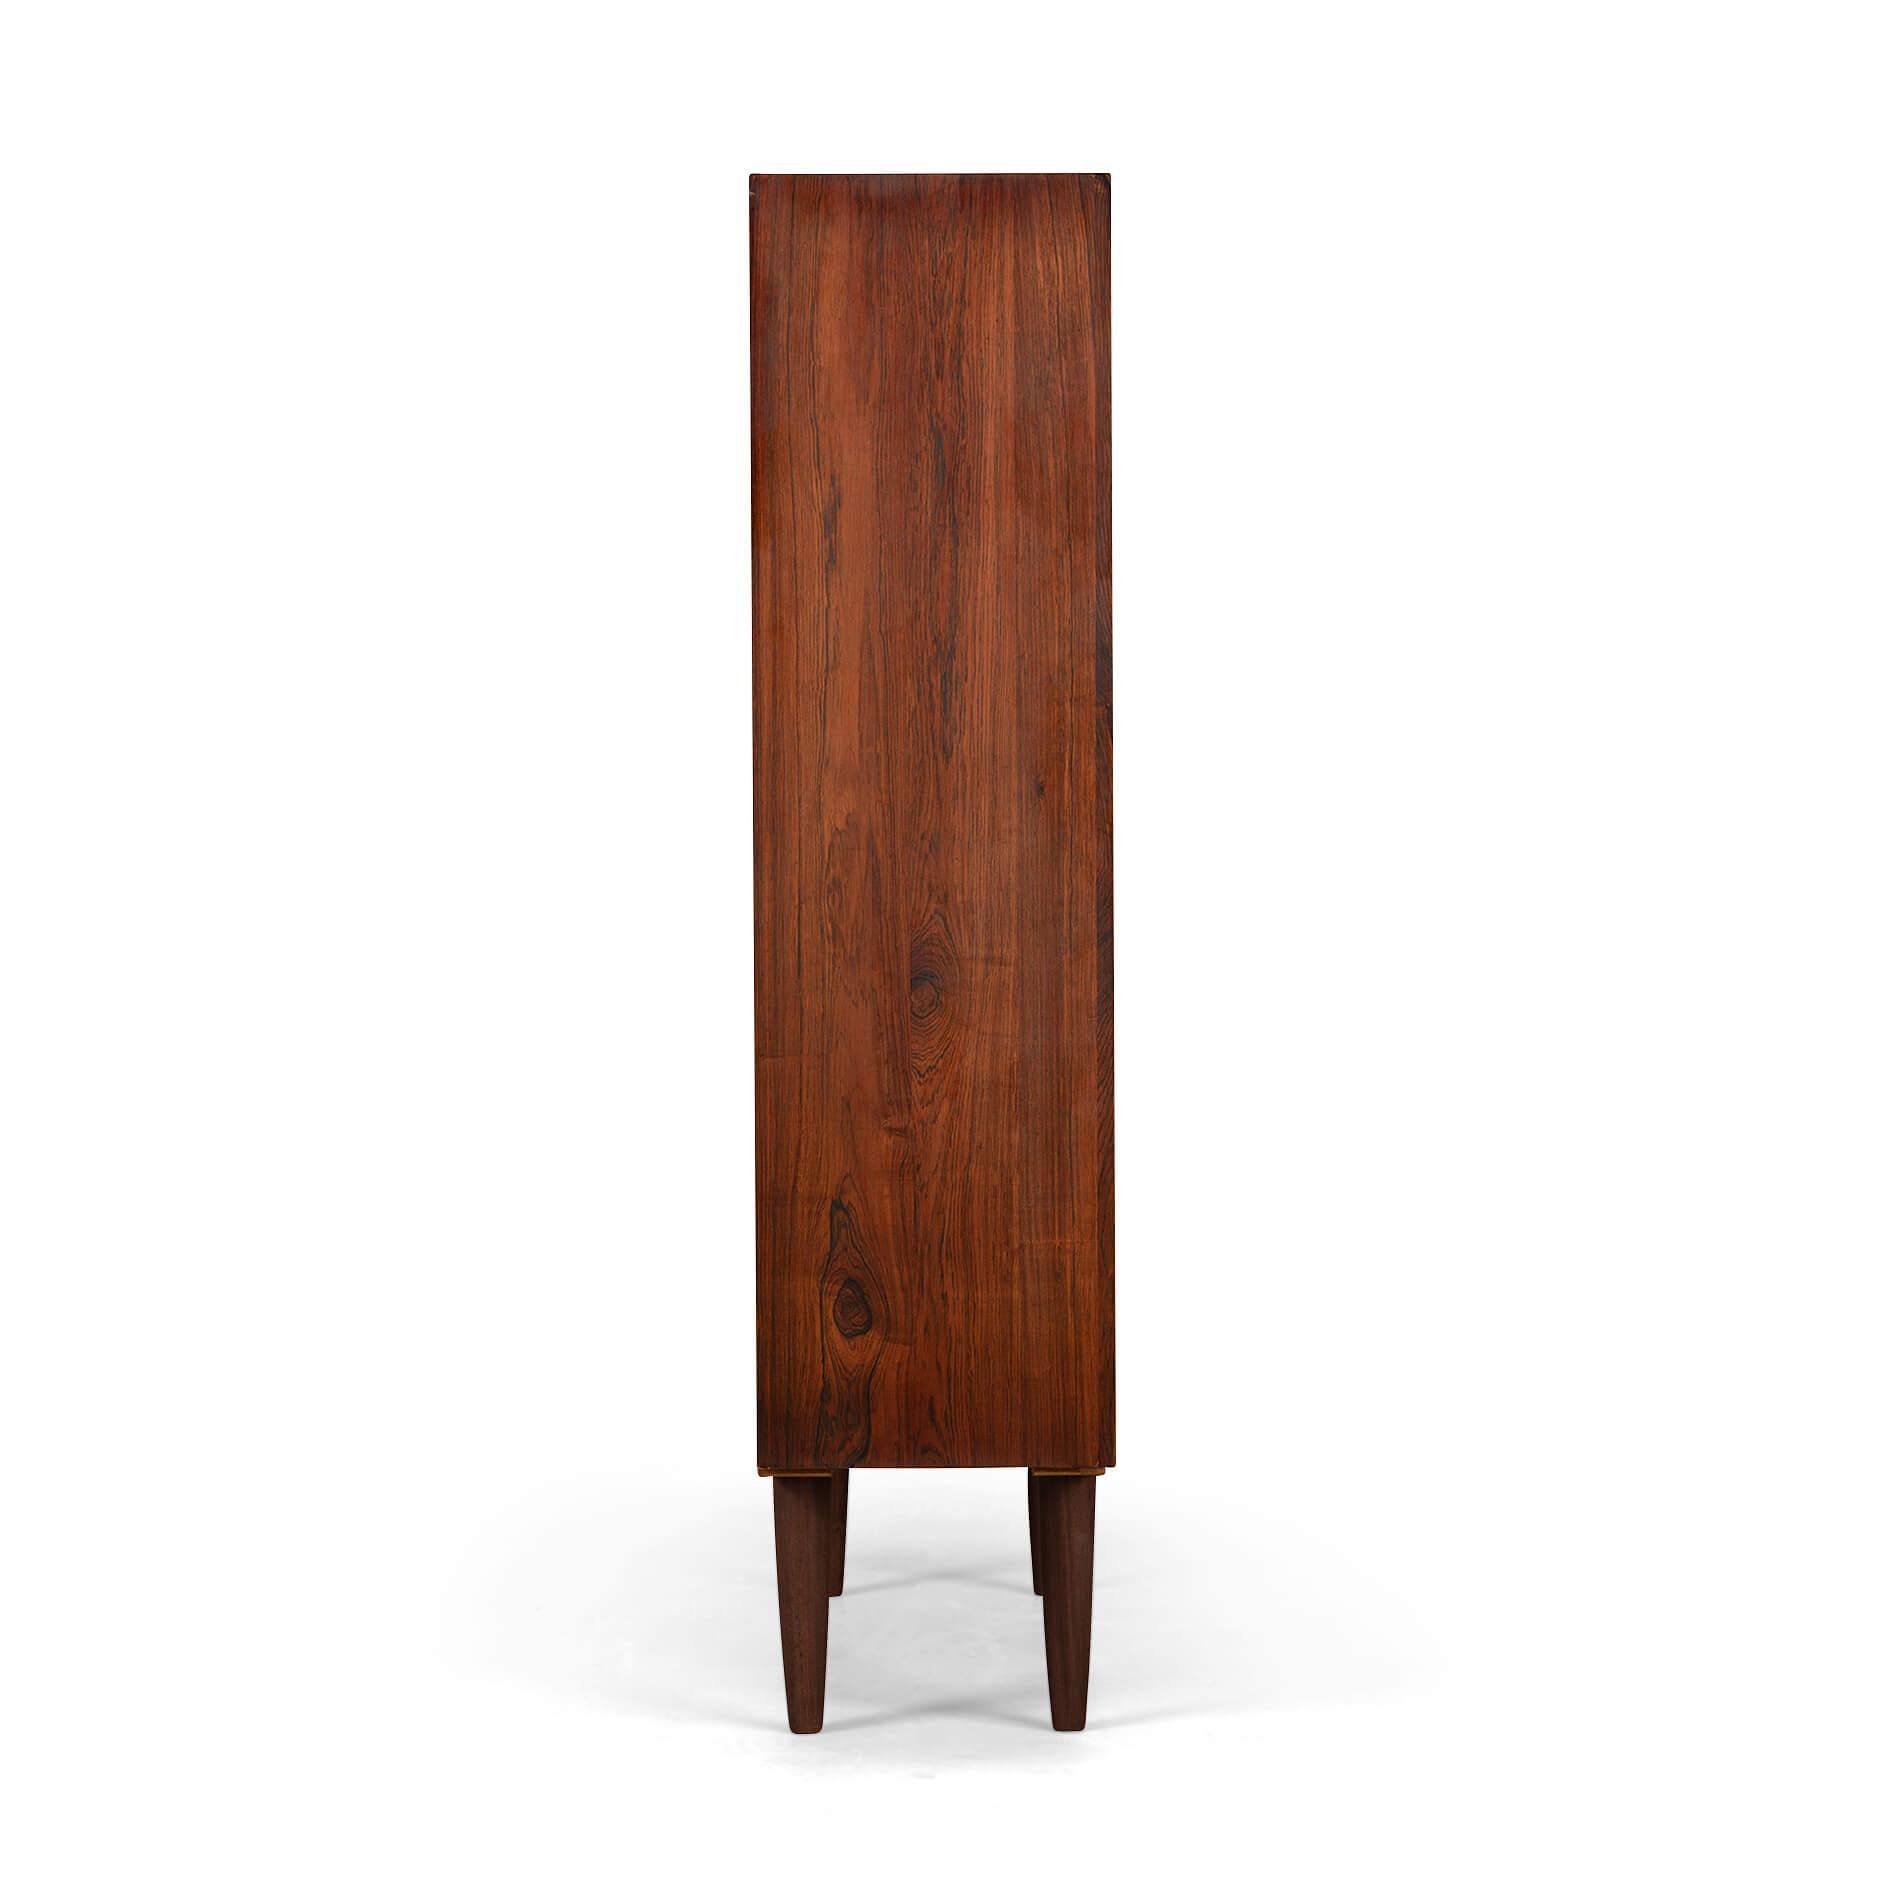 Danish tall bookcase in beautiful rosewood veneer. 
Made by Nexo. This bookcase is in very good vintage condition and has a total of 6 height-adjustable shelves.
